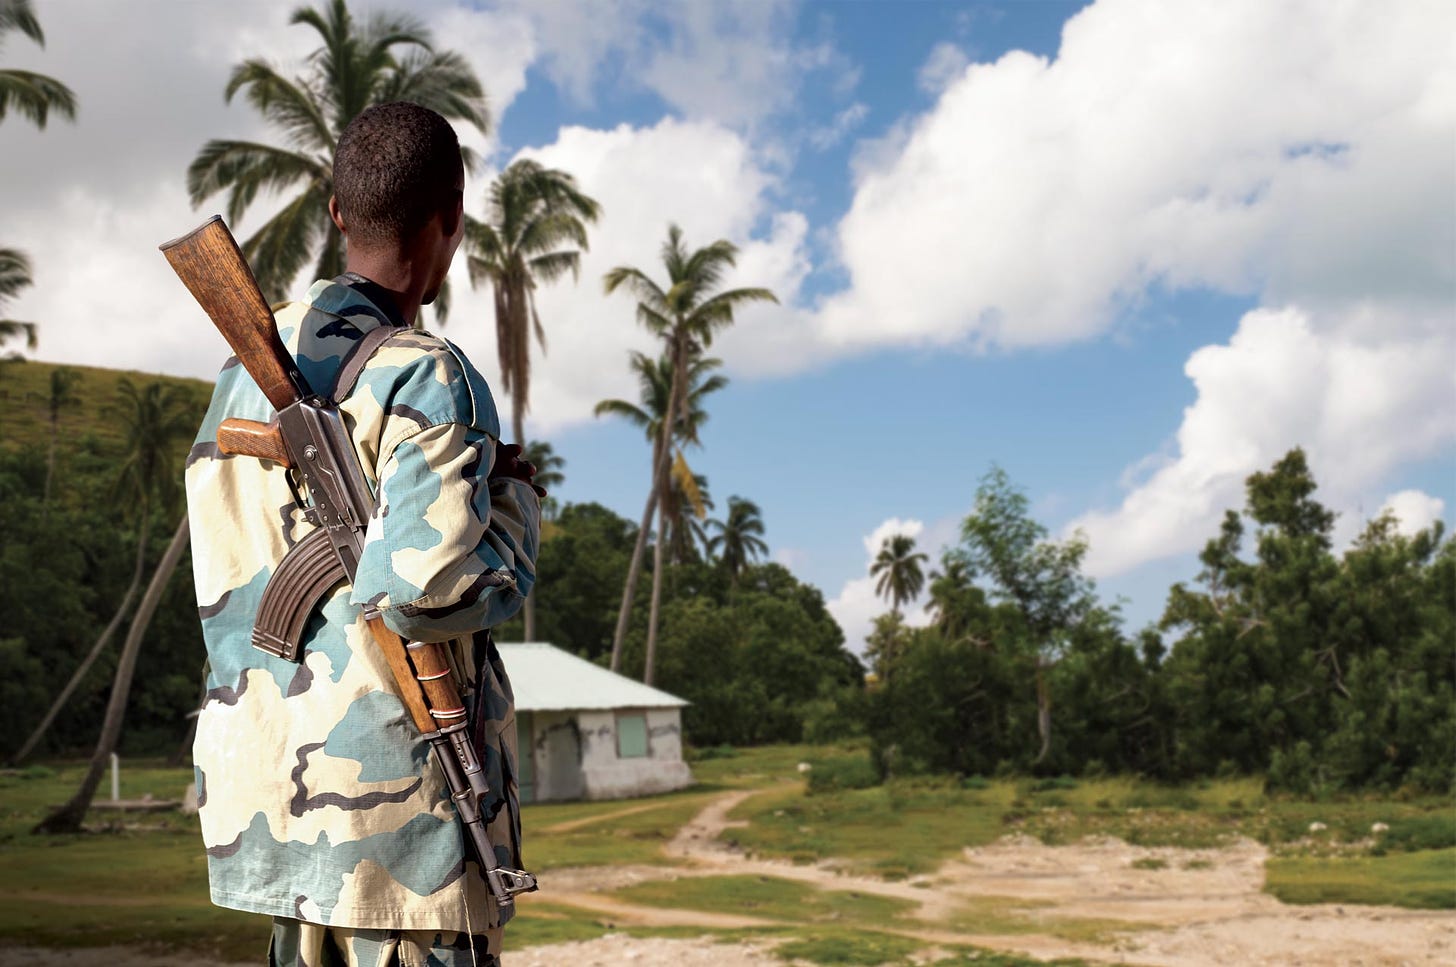 Colored man with an AK-47 rifle in a Haitian landscape